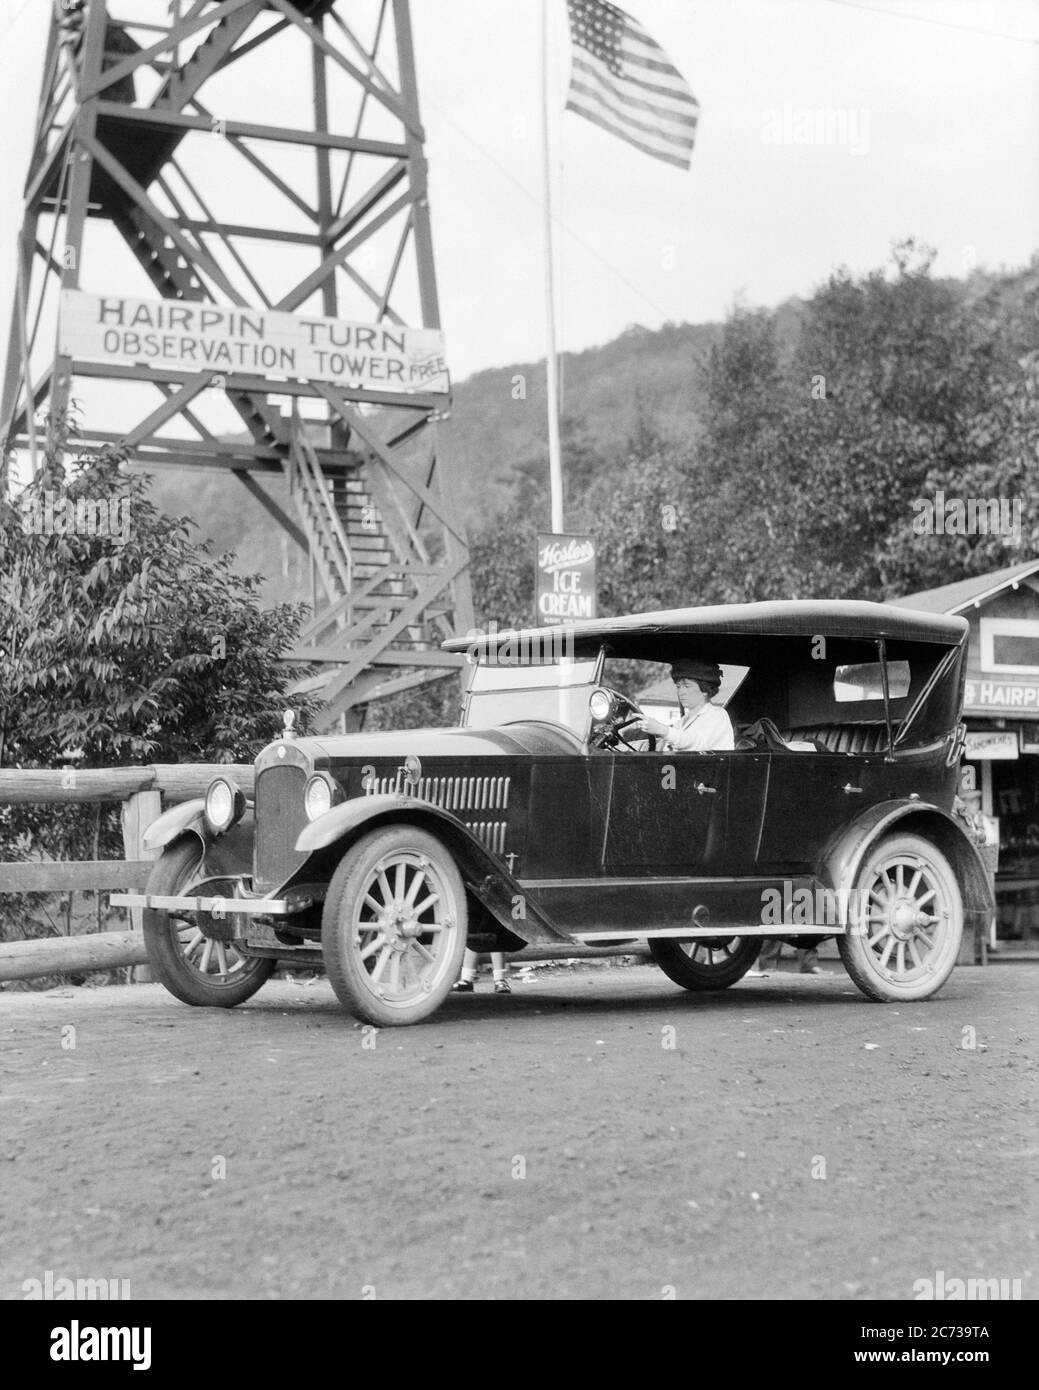 1920s WOMAN DRIVING A MITCHELL FOUR DOOR TOURING CAR STOPPED AT OBSERVATION TOWER FOR A HAIRPIN TURN PENNSYLVANIA USA - m8909 HAR001 HARS AUTOMOBILE RISK TRANSPORTATION B&W NORTH AMERICA NORTH AMERICAN TOWER HEAD AND SHOULDERS ADVENTURE COURAGE AUTOS EXCITEMENT PA ROAD TRIP COMMONWEALTH AUTOMOBILES KEYSTONE STATE STARS AND STRIPES VEHICLES MITCHELL MID-ADULT MID-ADULT WOMAN OBSERVATION RED WHITE AND BLUE STOPPED BLACK AND WHITE CAUCASIAN ETHNICITY HAR001 OLD FASHIONED TOURING TOURISM Stock Photo